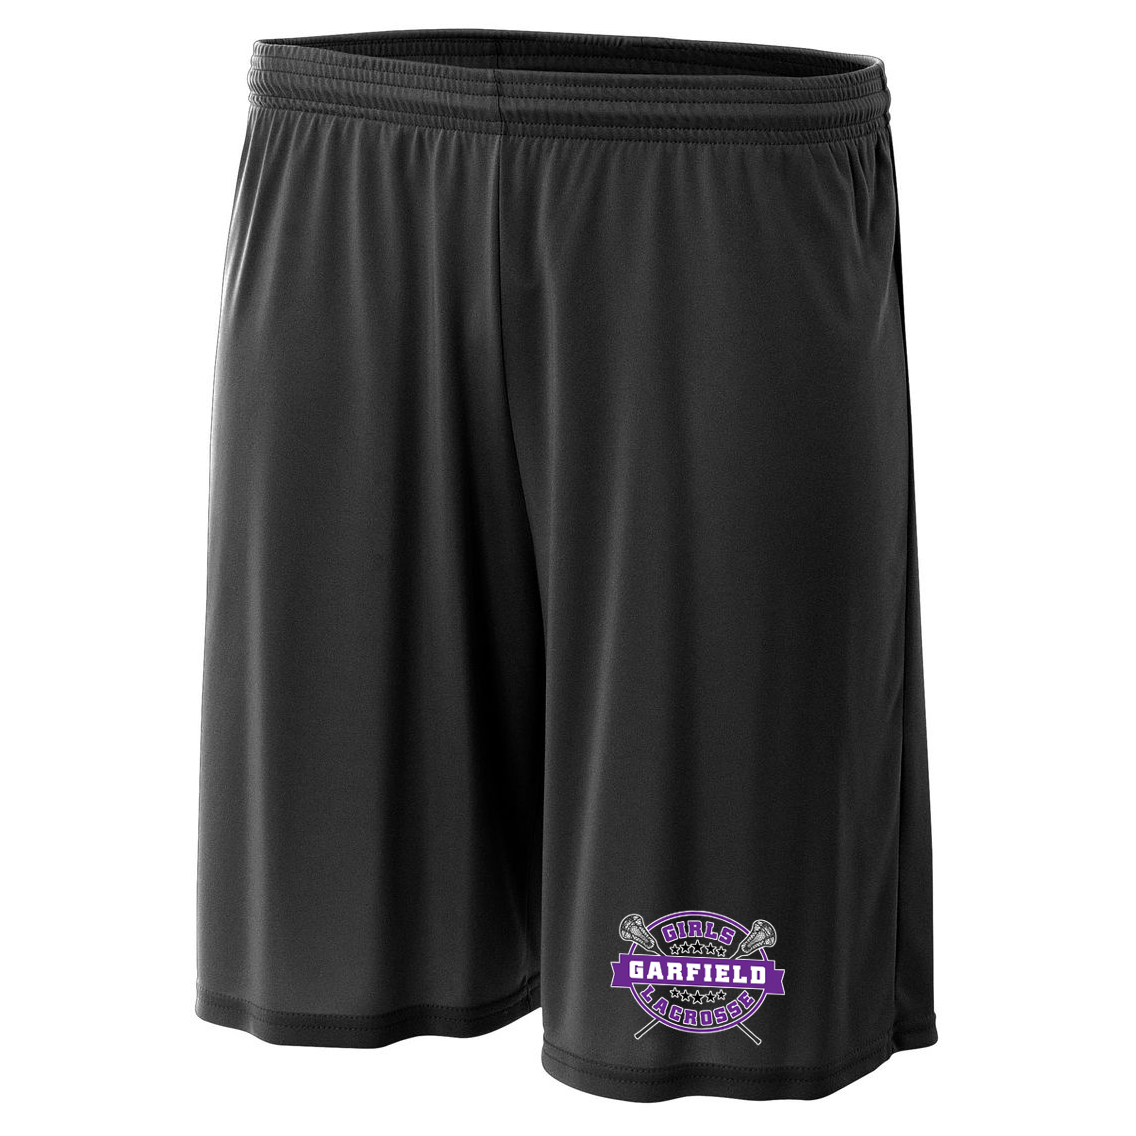 Garfield Lacrosse Cooling 7" Performance Shorts